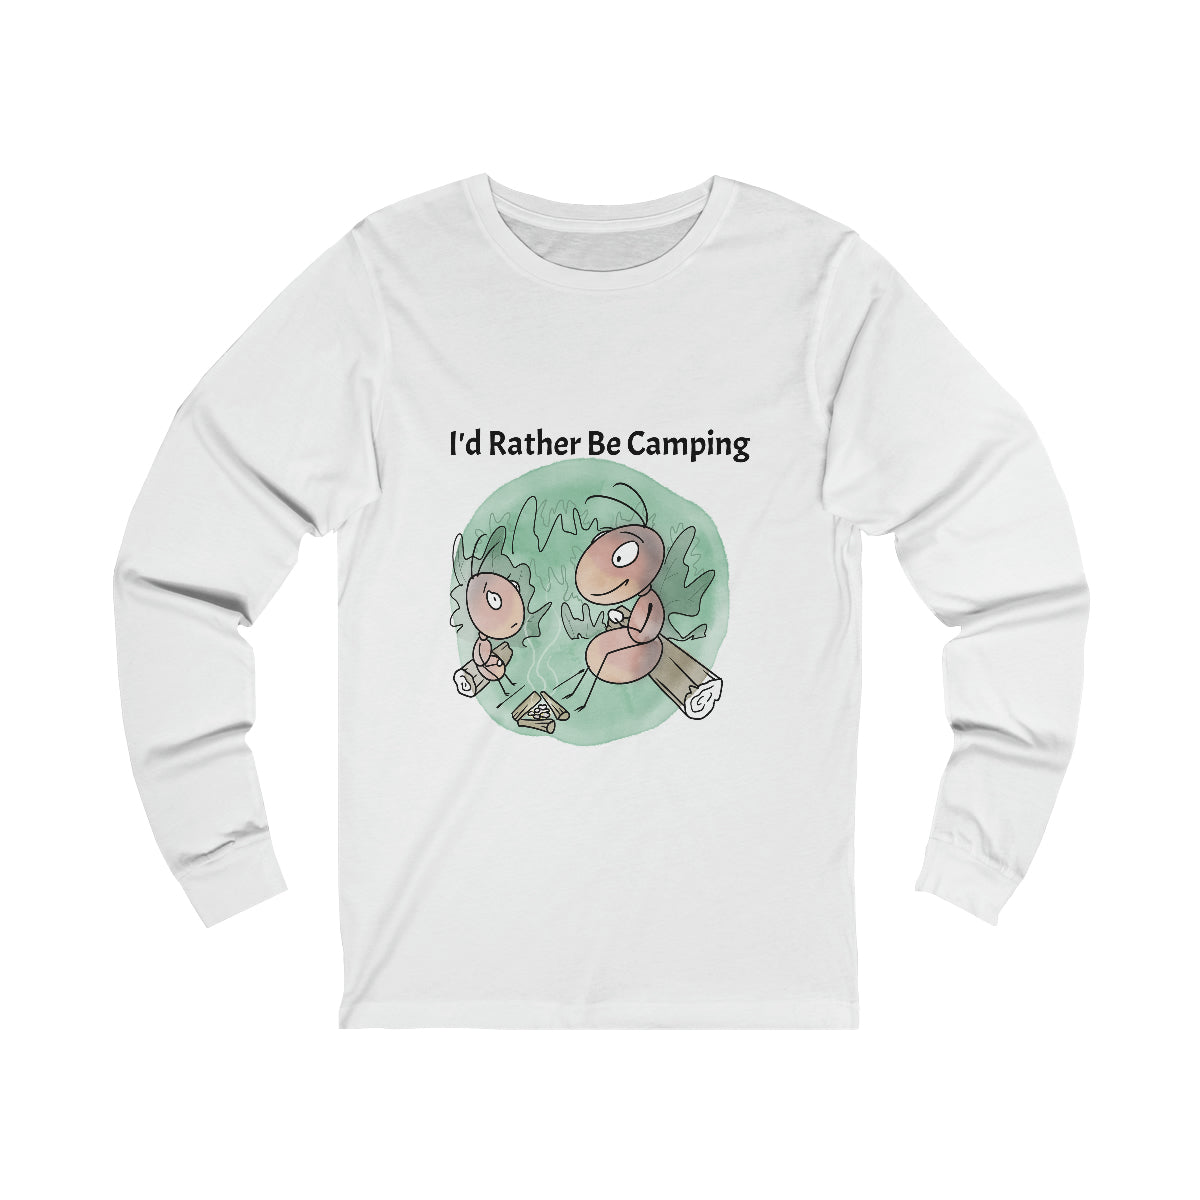 Rather be camping - Unisex Jersey Long Sleeve Tee